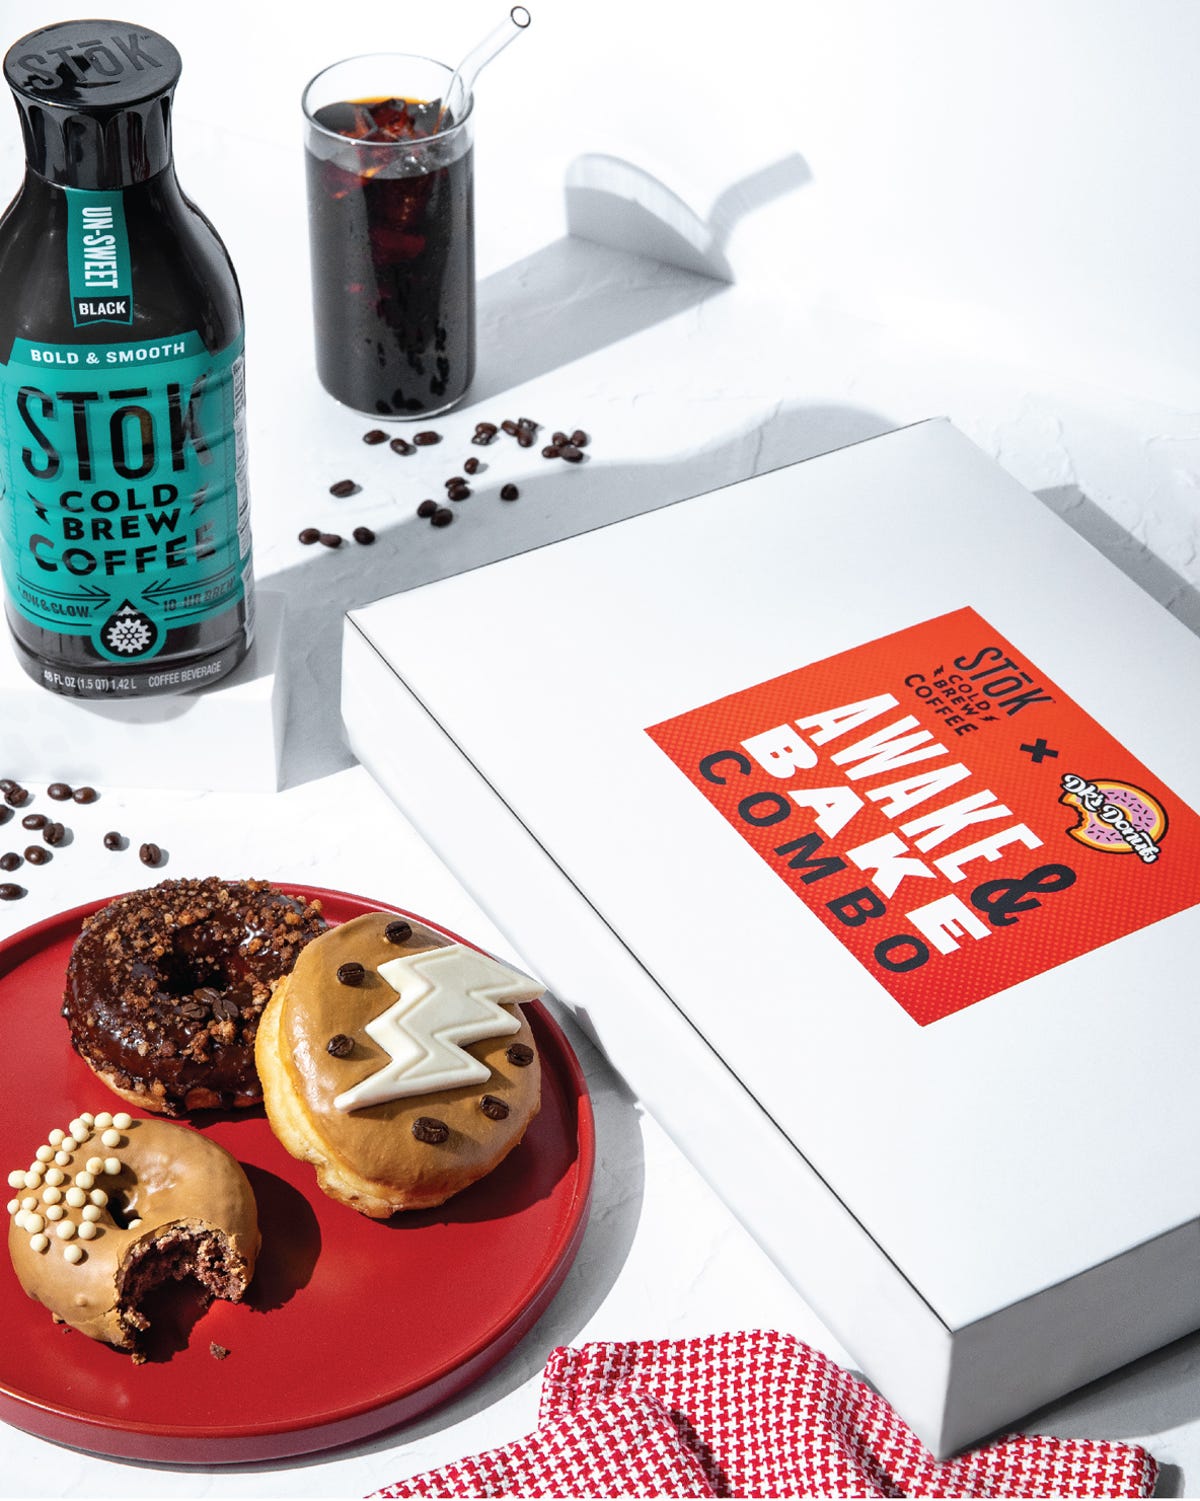 A bottle of STōK cold brew coffee and a box of DK's Donuts